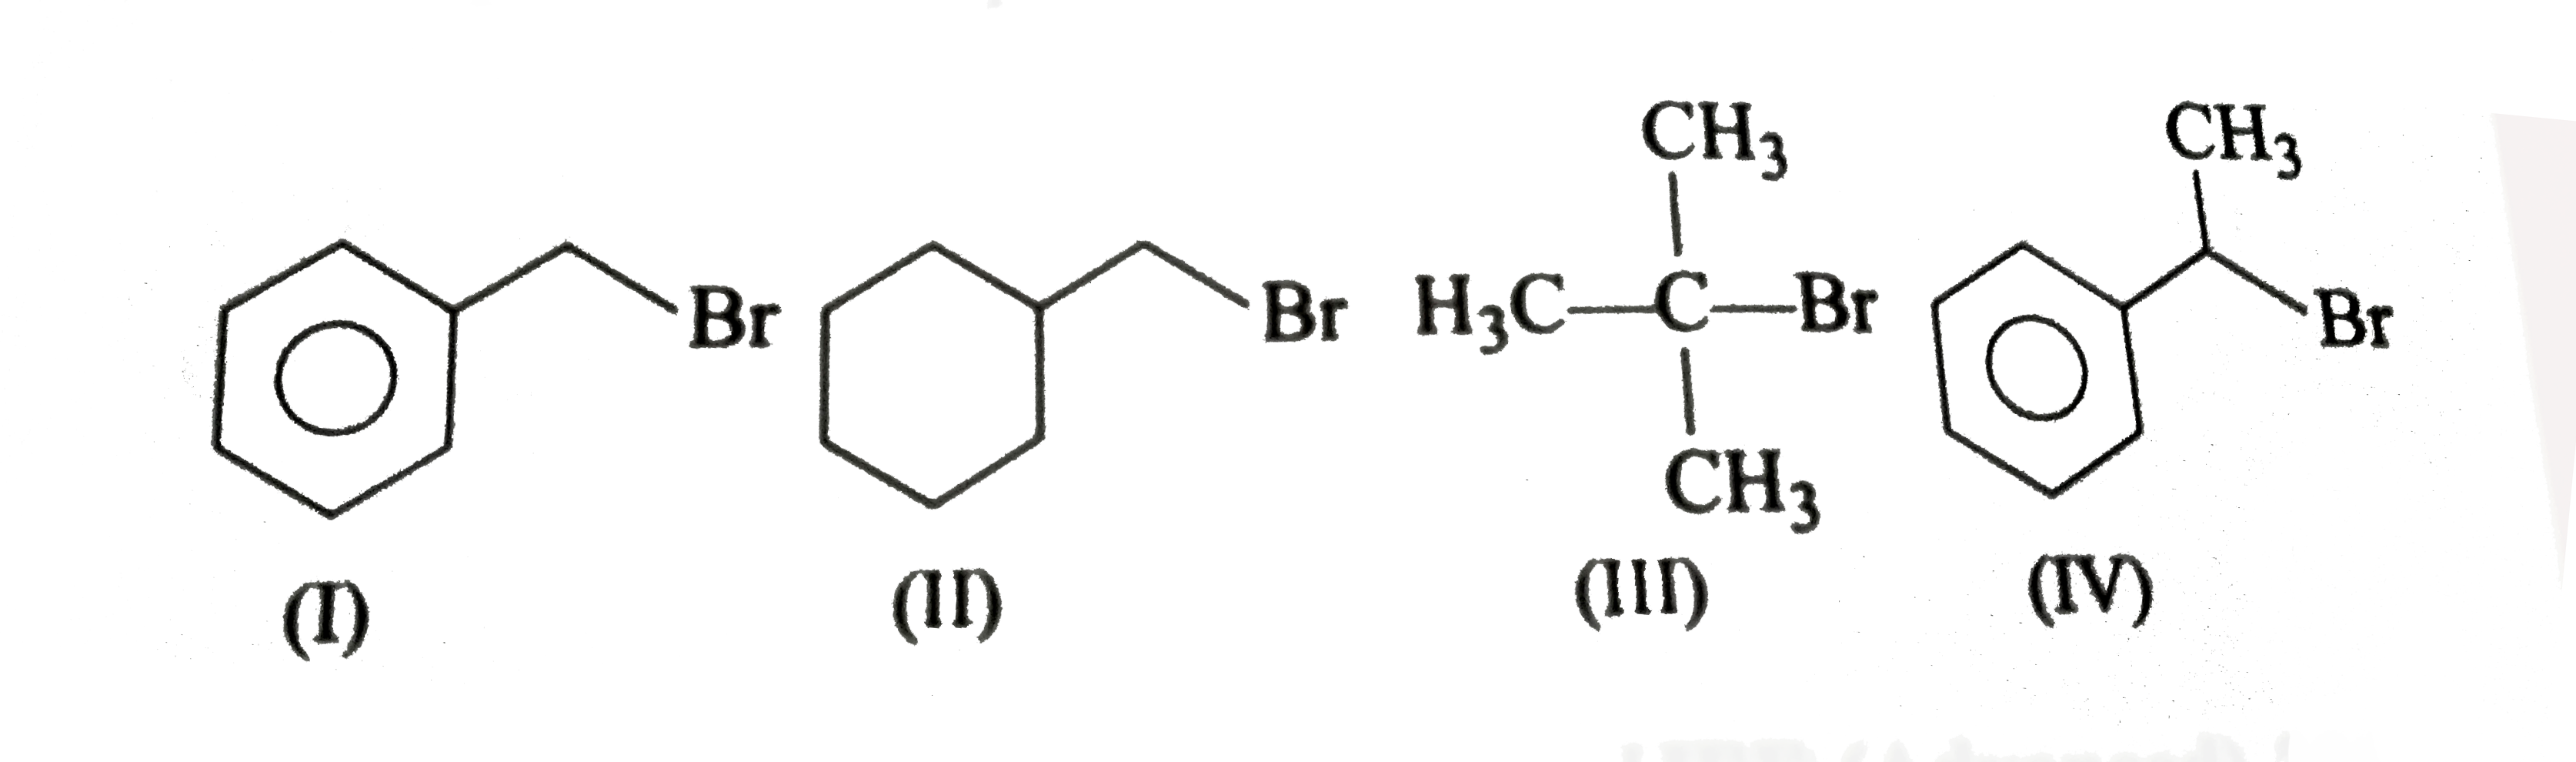 For the following compounds the correct statement(s) with respect oif nucleophilic substitution reactions is (are) :